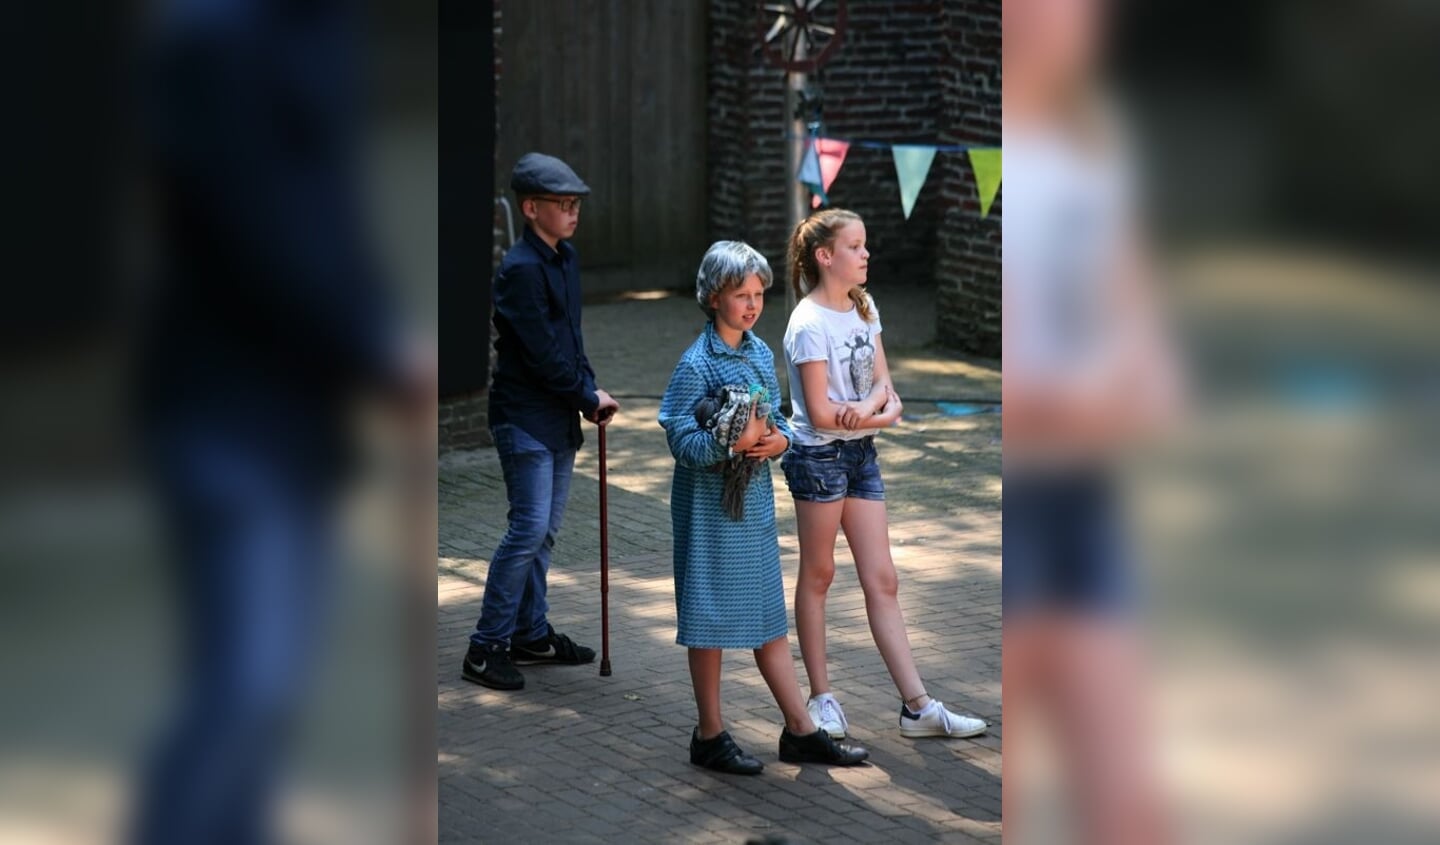 Heeswijk-Dinther - Musical 't Palet